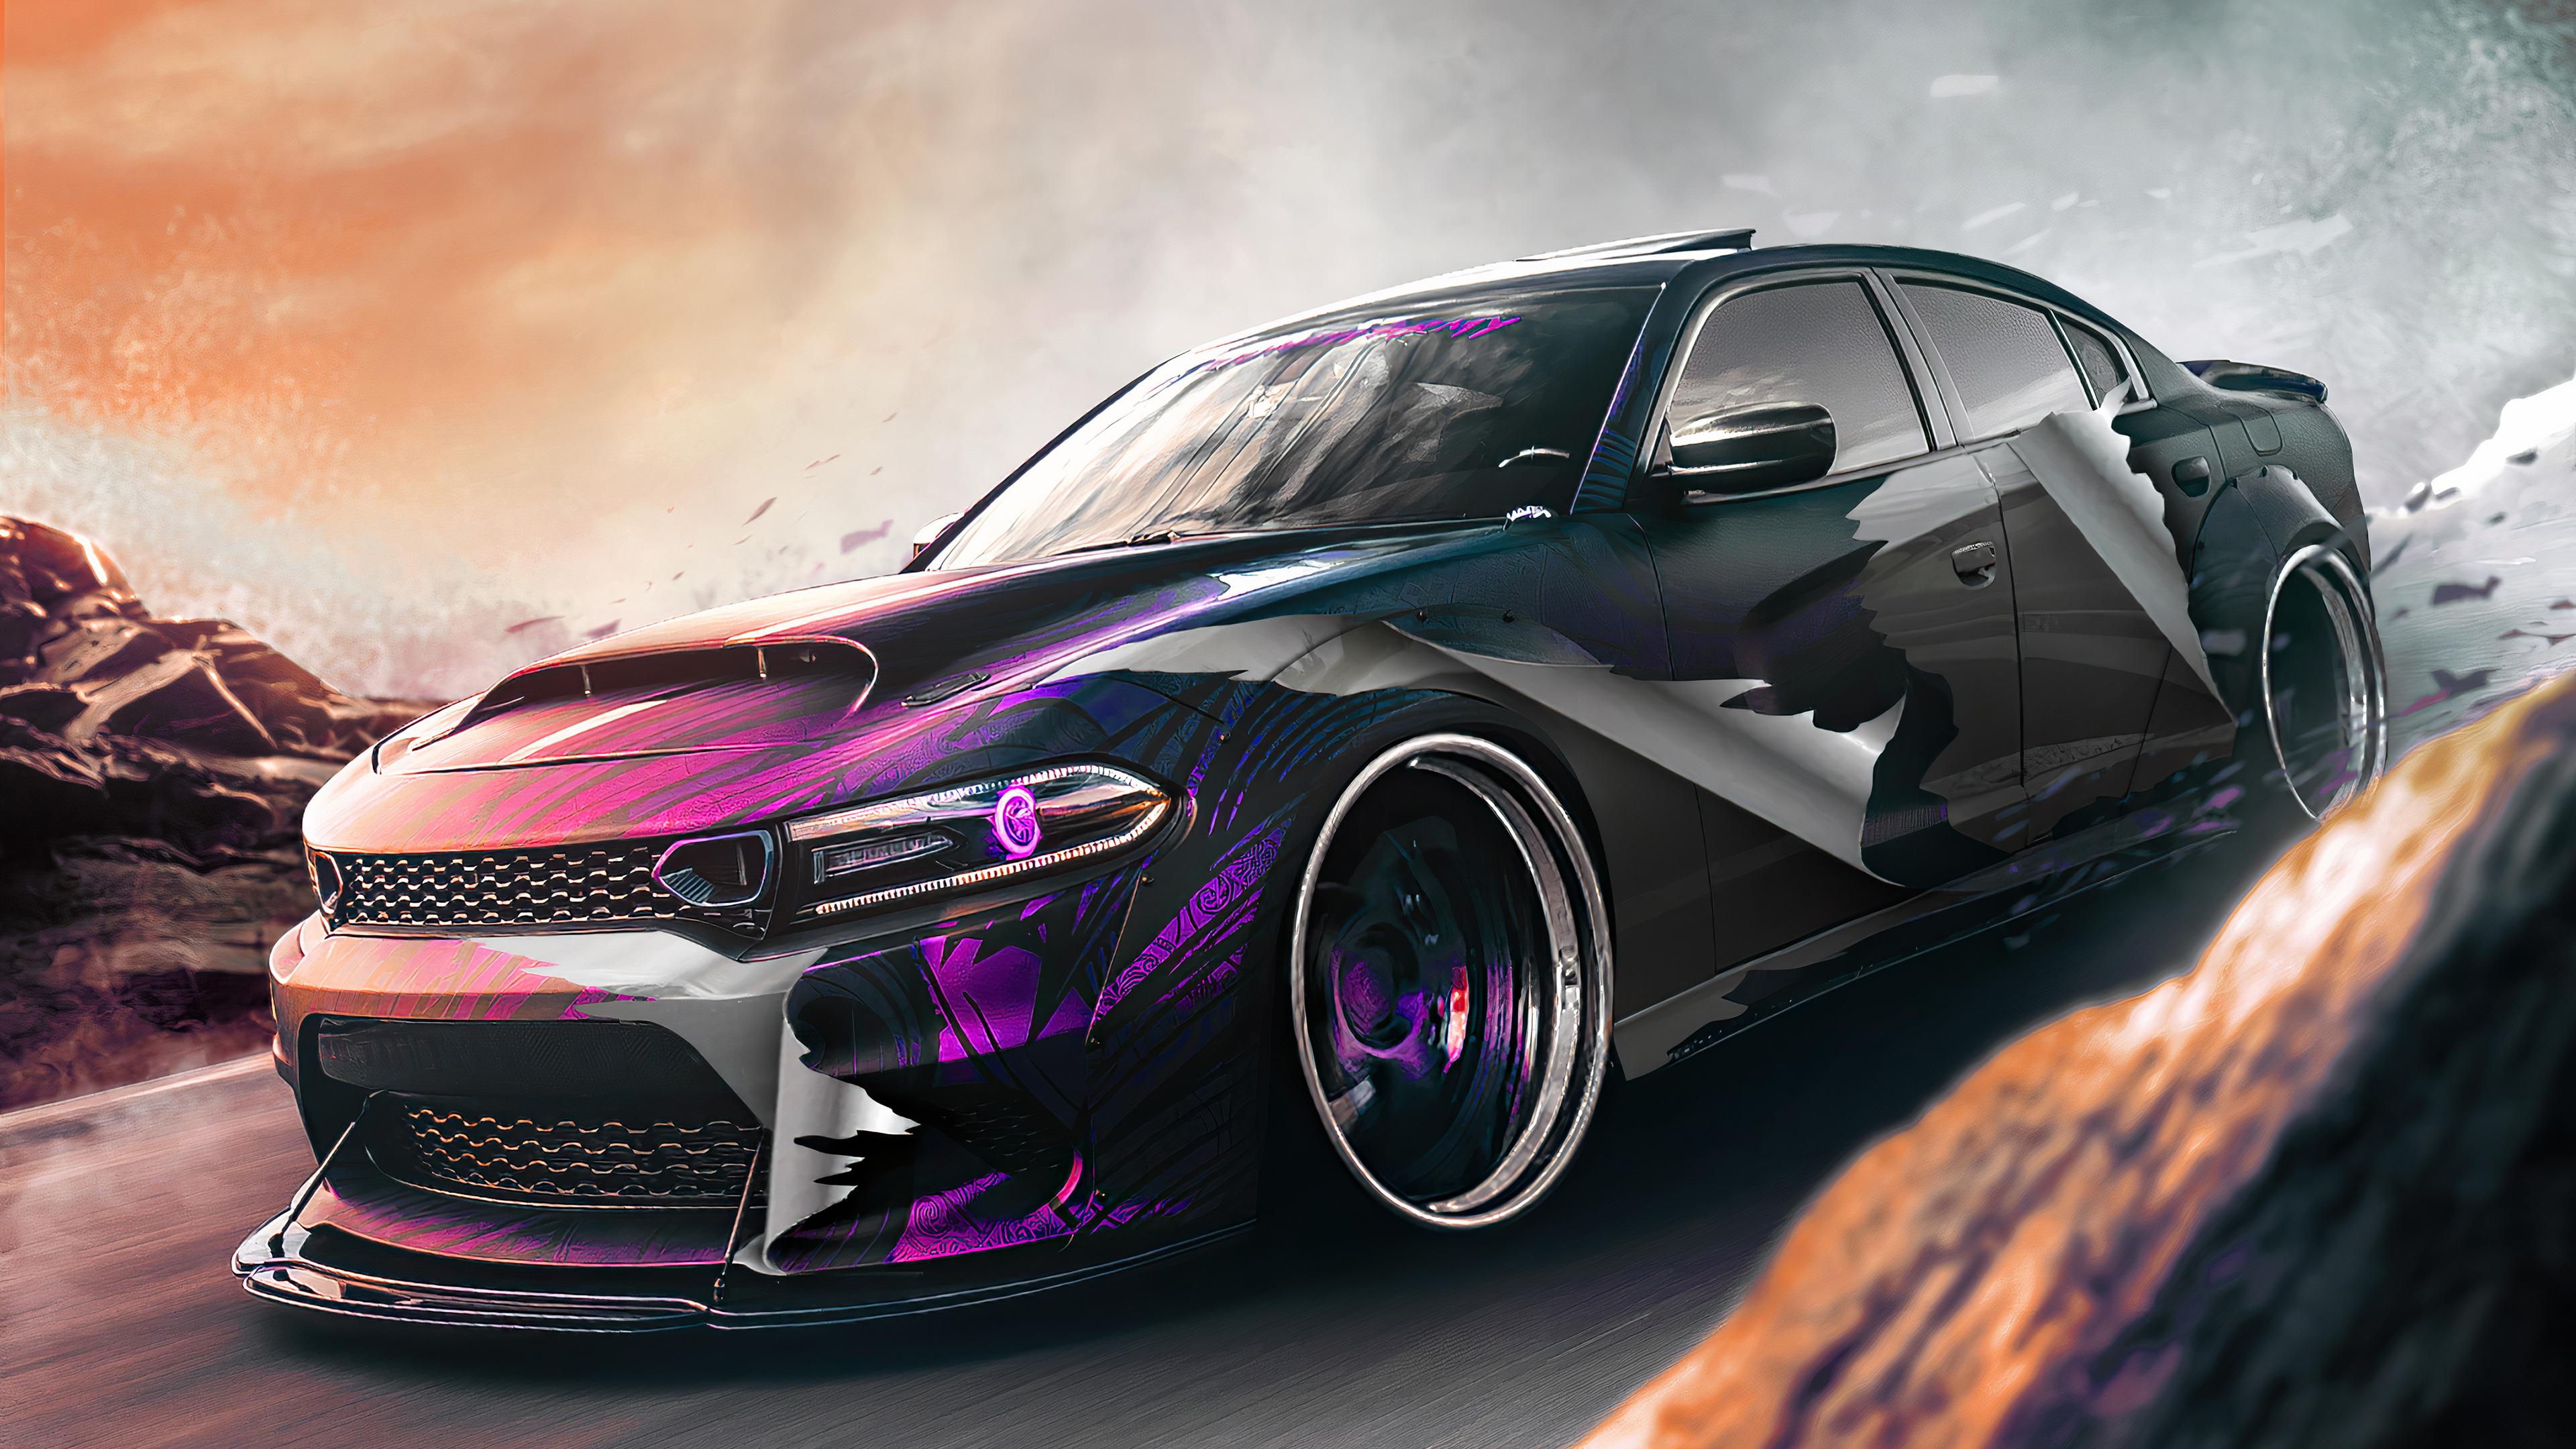 Charger Hellcat Wallpaper 68 images